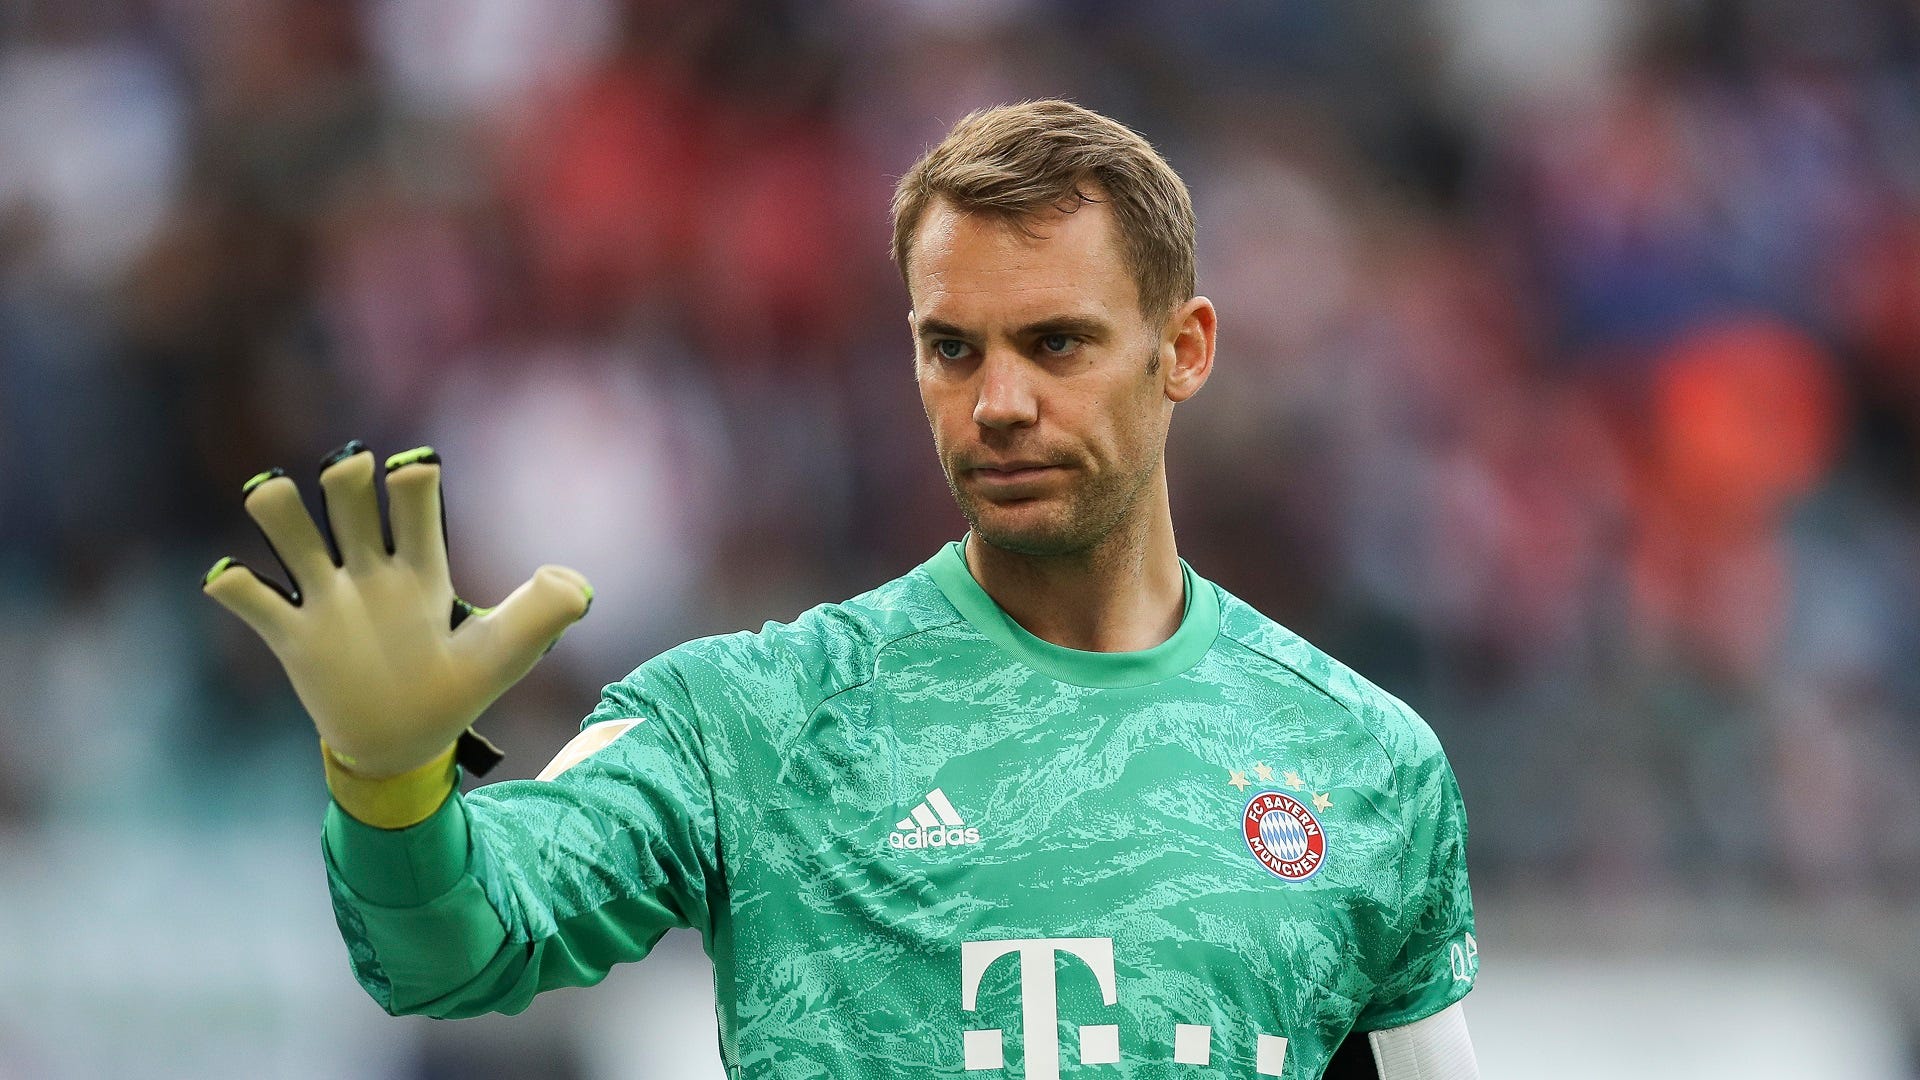 Bayern would be stupid to let Neuer go' - Maier | Goal.com